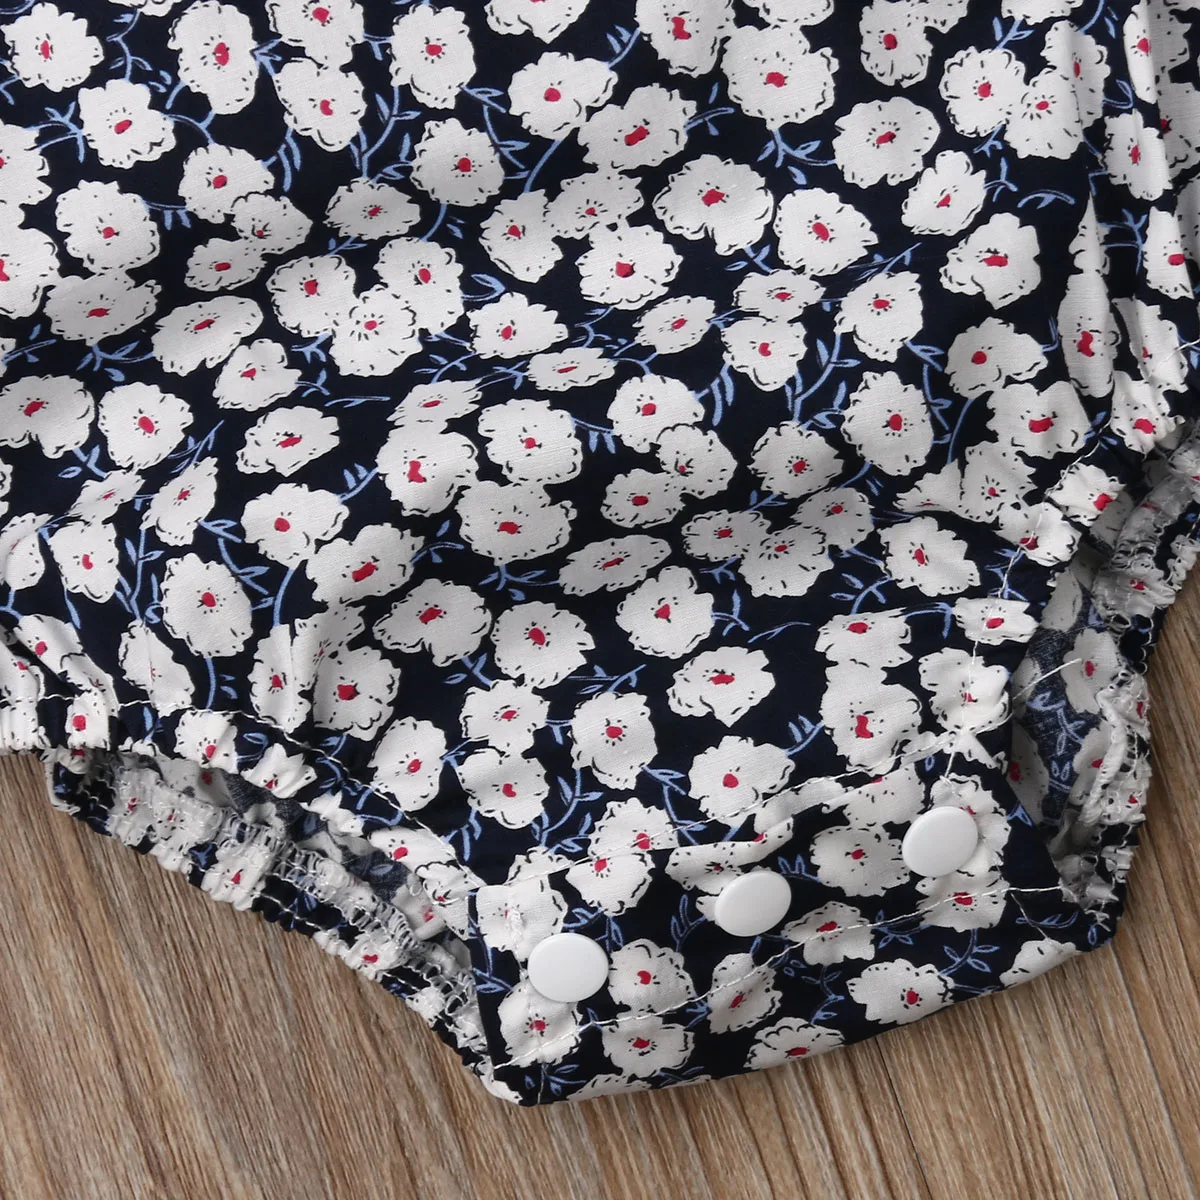 

2019 New Newborn Baby Girl Ruffle Sleeve Backless Tie Knot Floral Print Romper+Bowknot Headband Sunsuit Outfits Clothes 0-24M